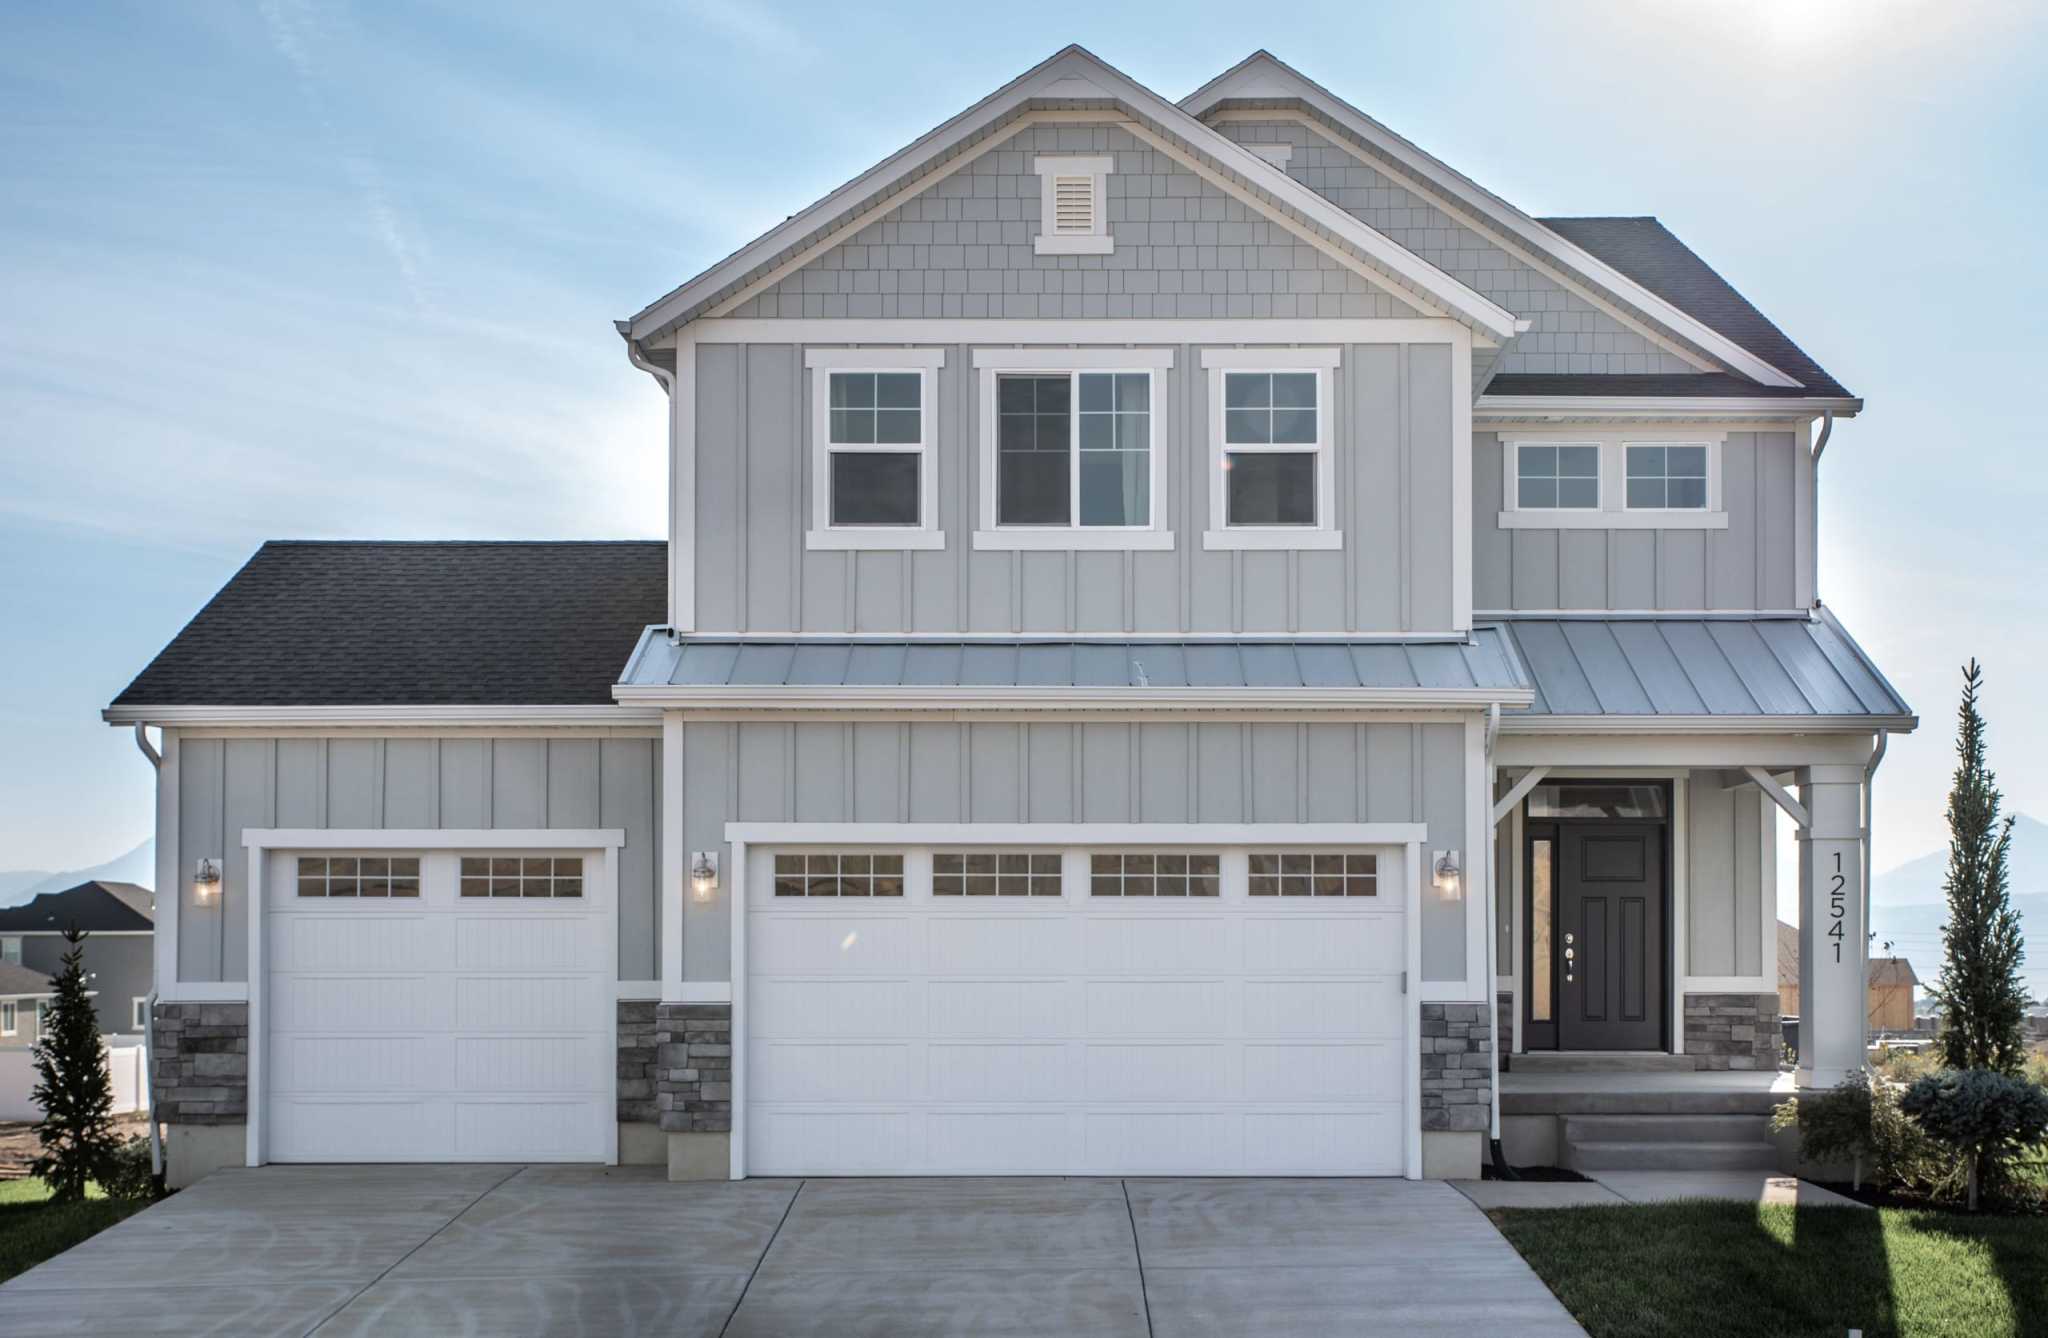 two-story gray single family home with 3-car garage